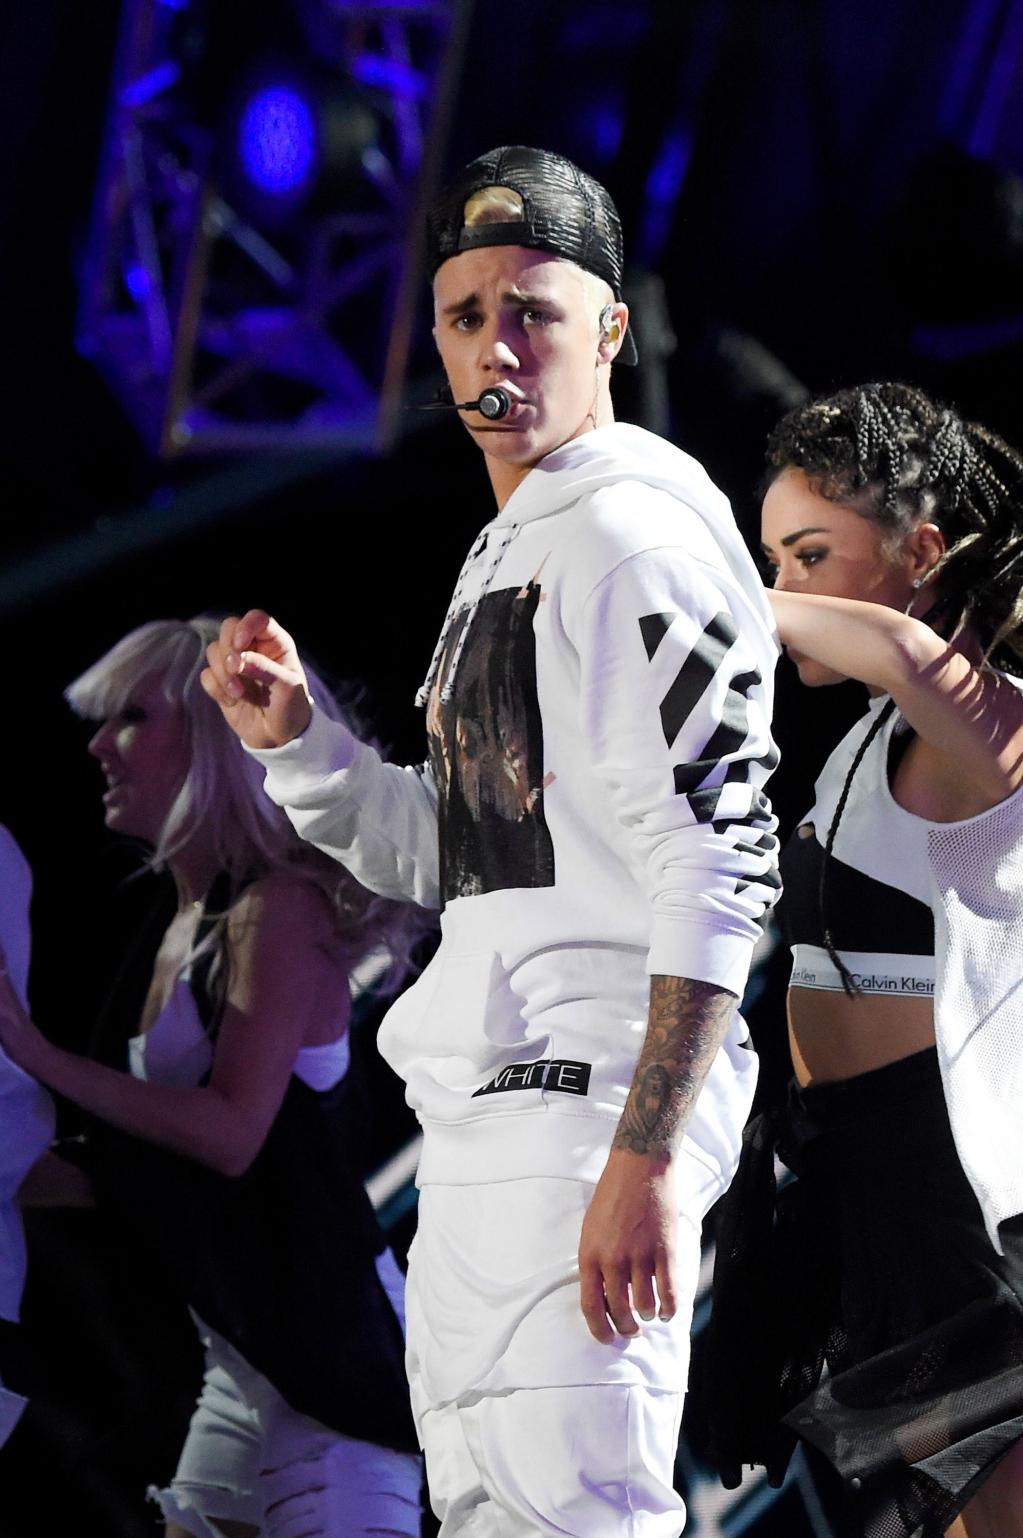 'Super Exhausted': Why Justin Bieber Canceled His Purpose World Tour